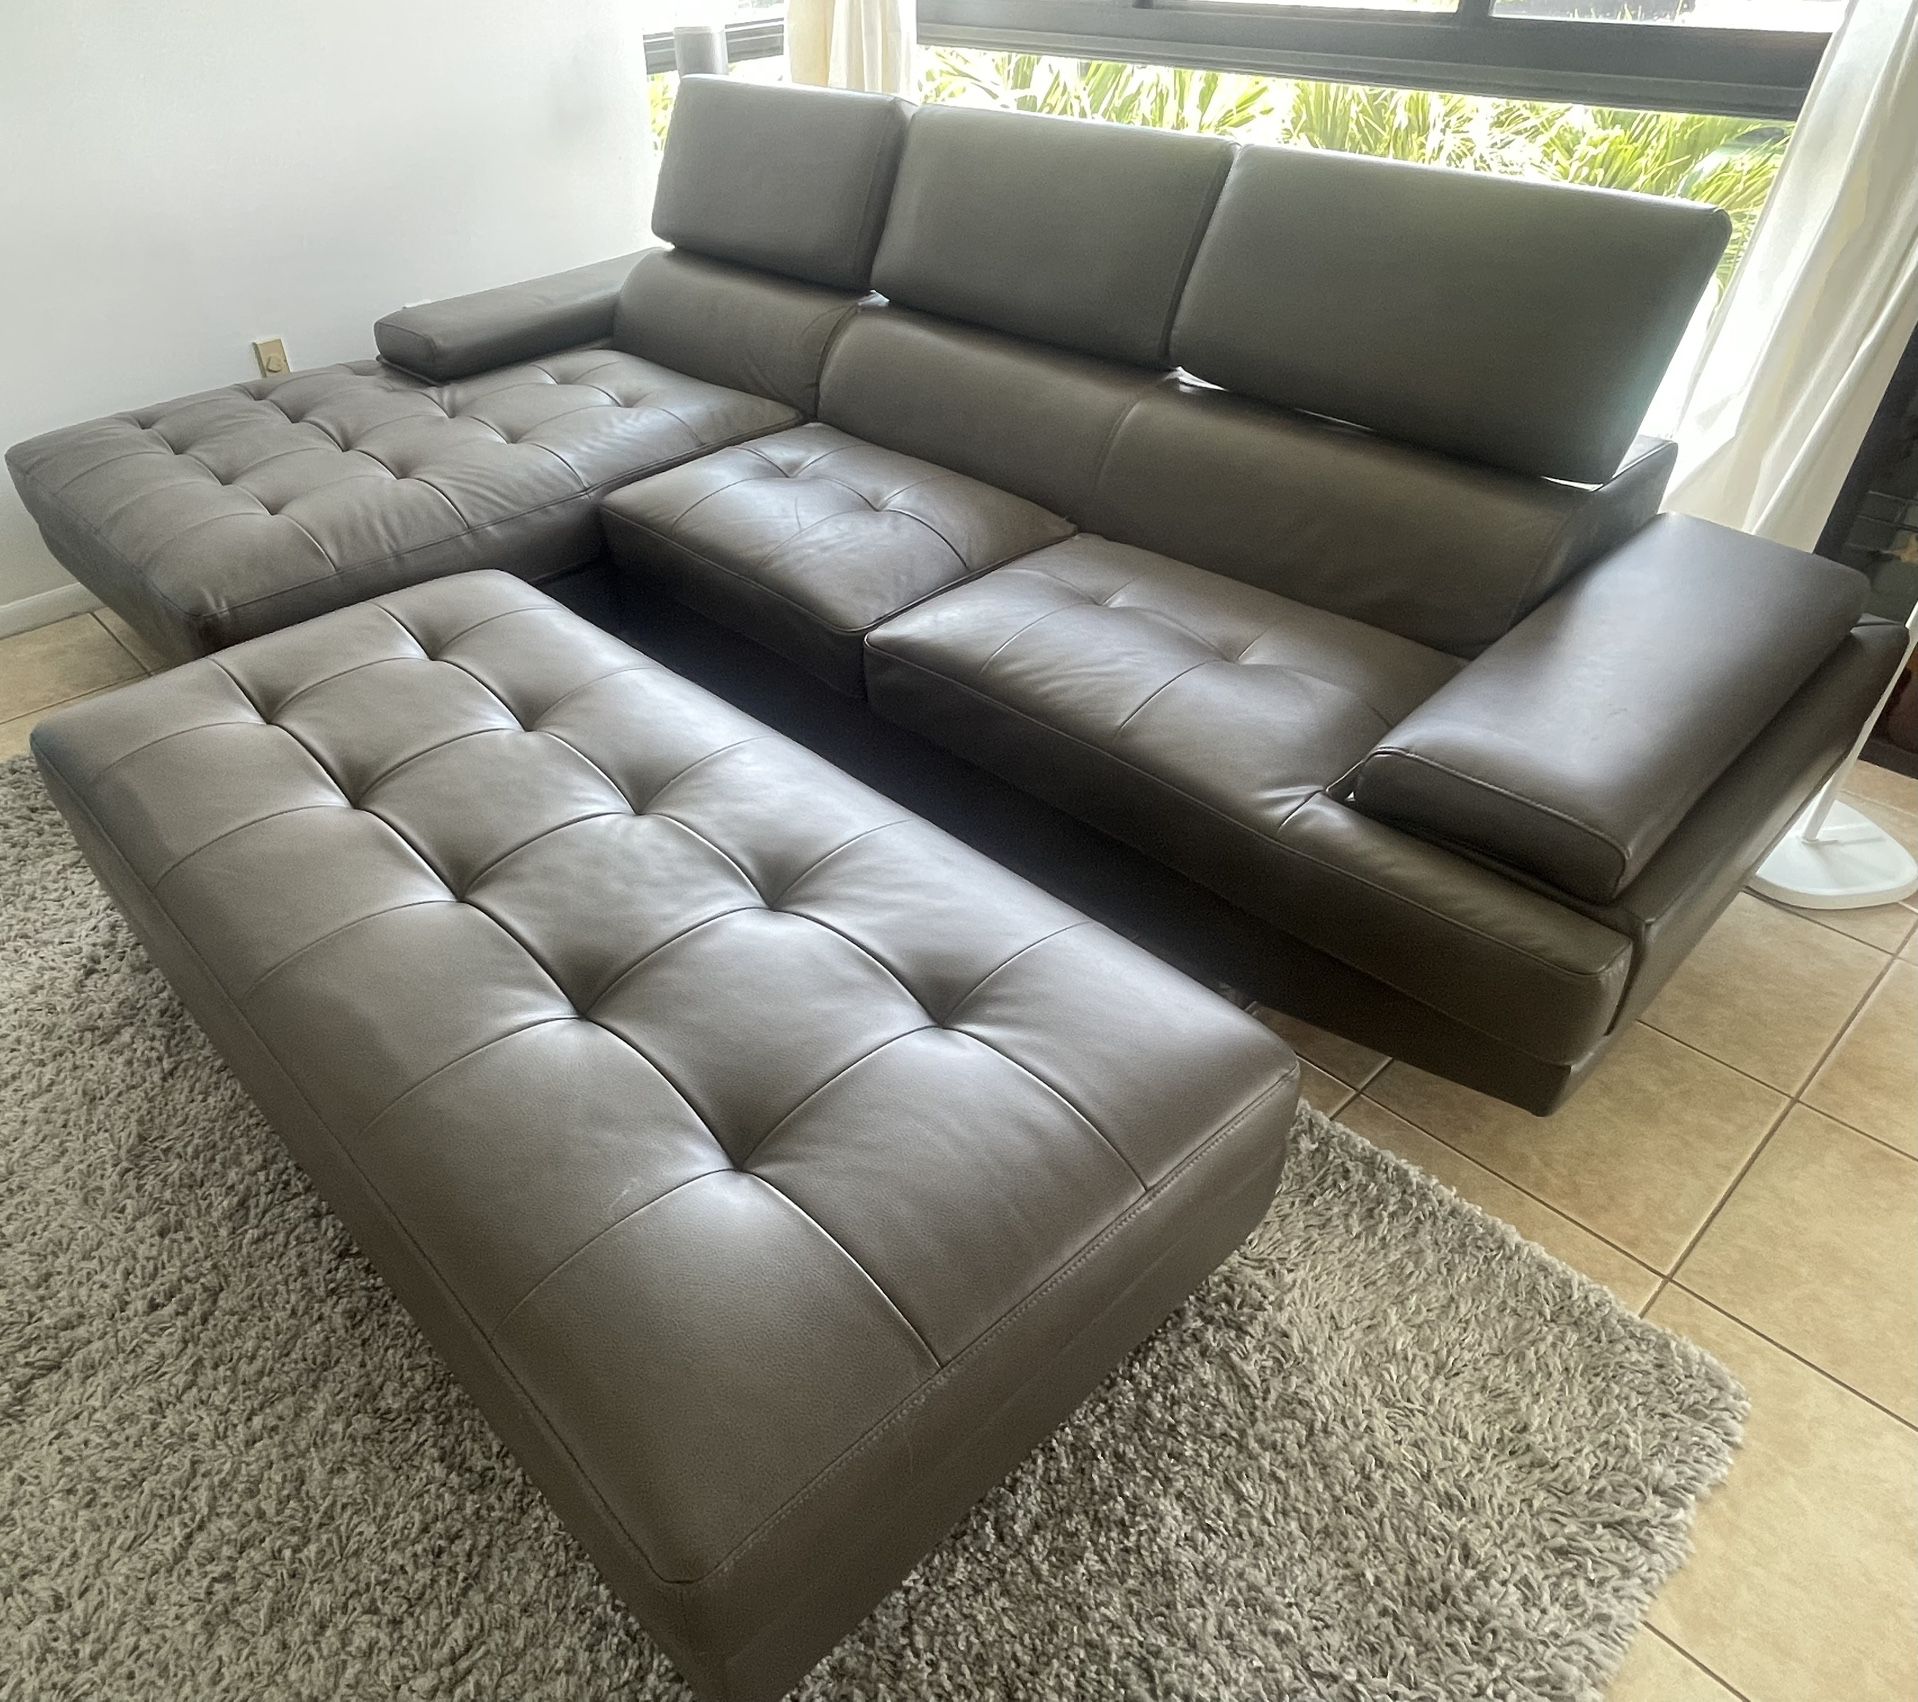 Couch + Ottoman For Sale. Like new Condition